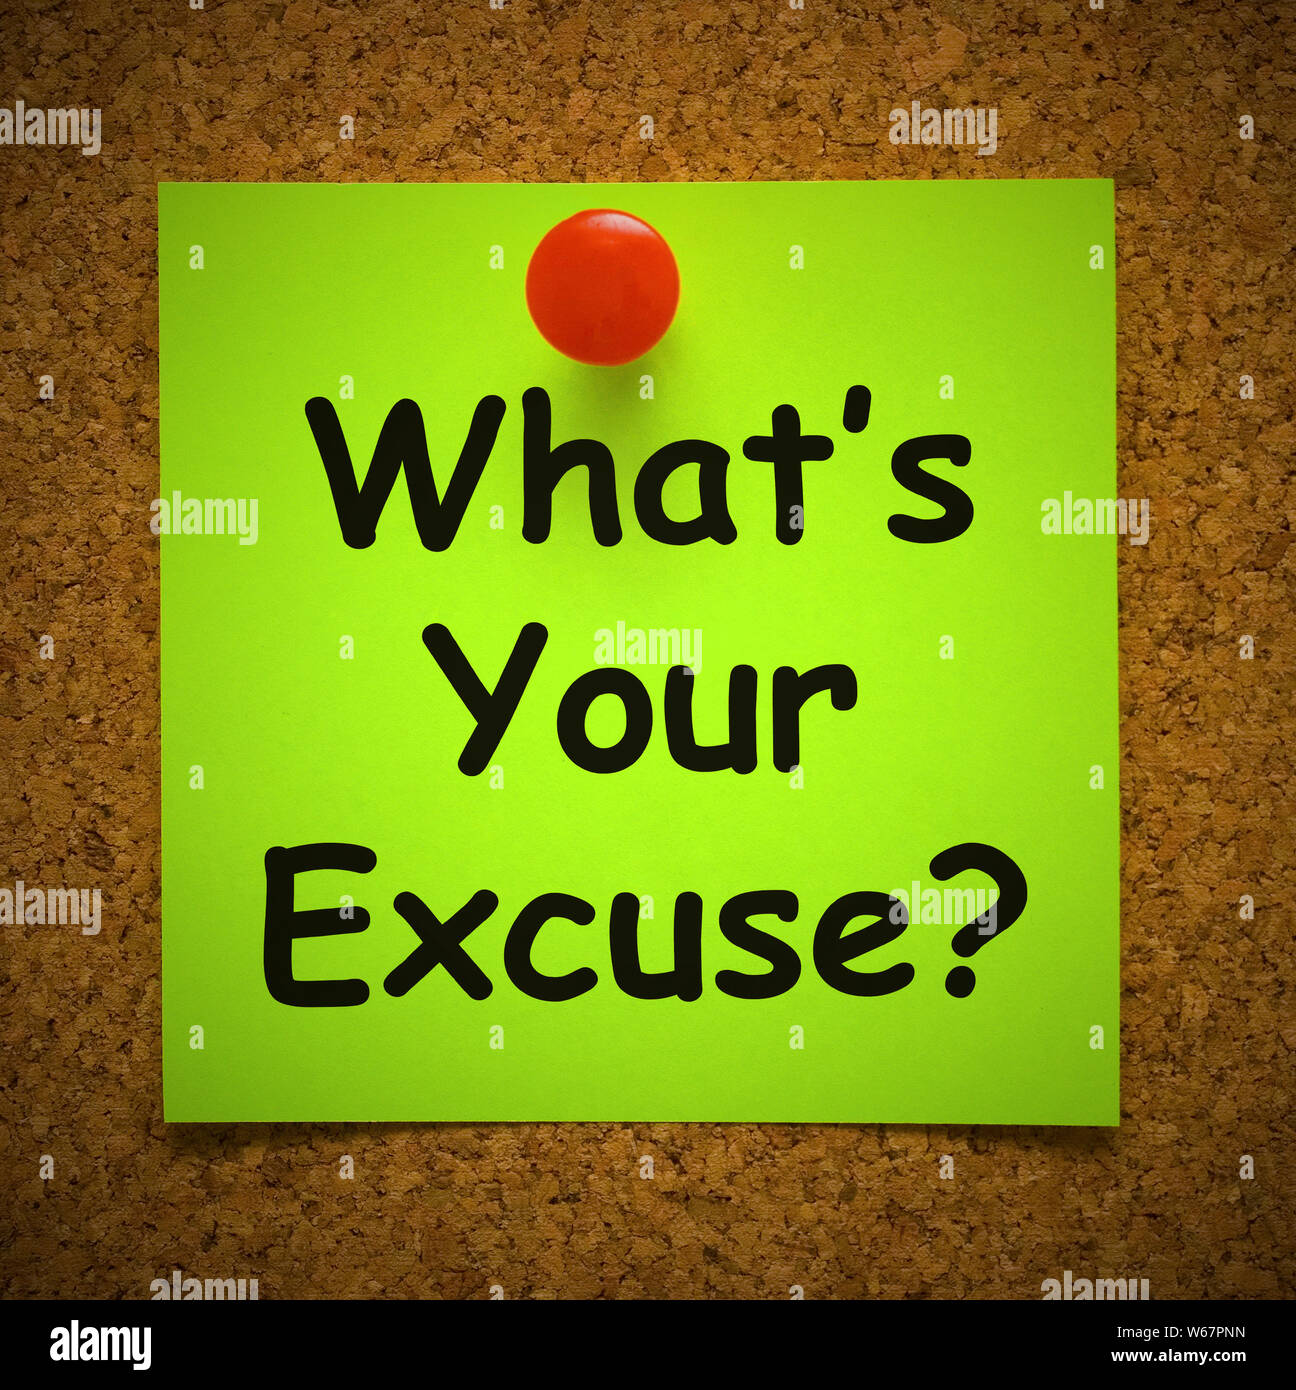 What's your excuse idiom means justification or Reason. An apology or clarification of a confession - 3d illustration Stock Photo